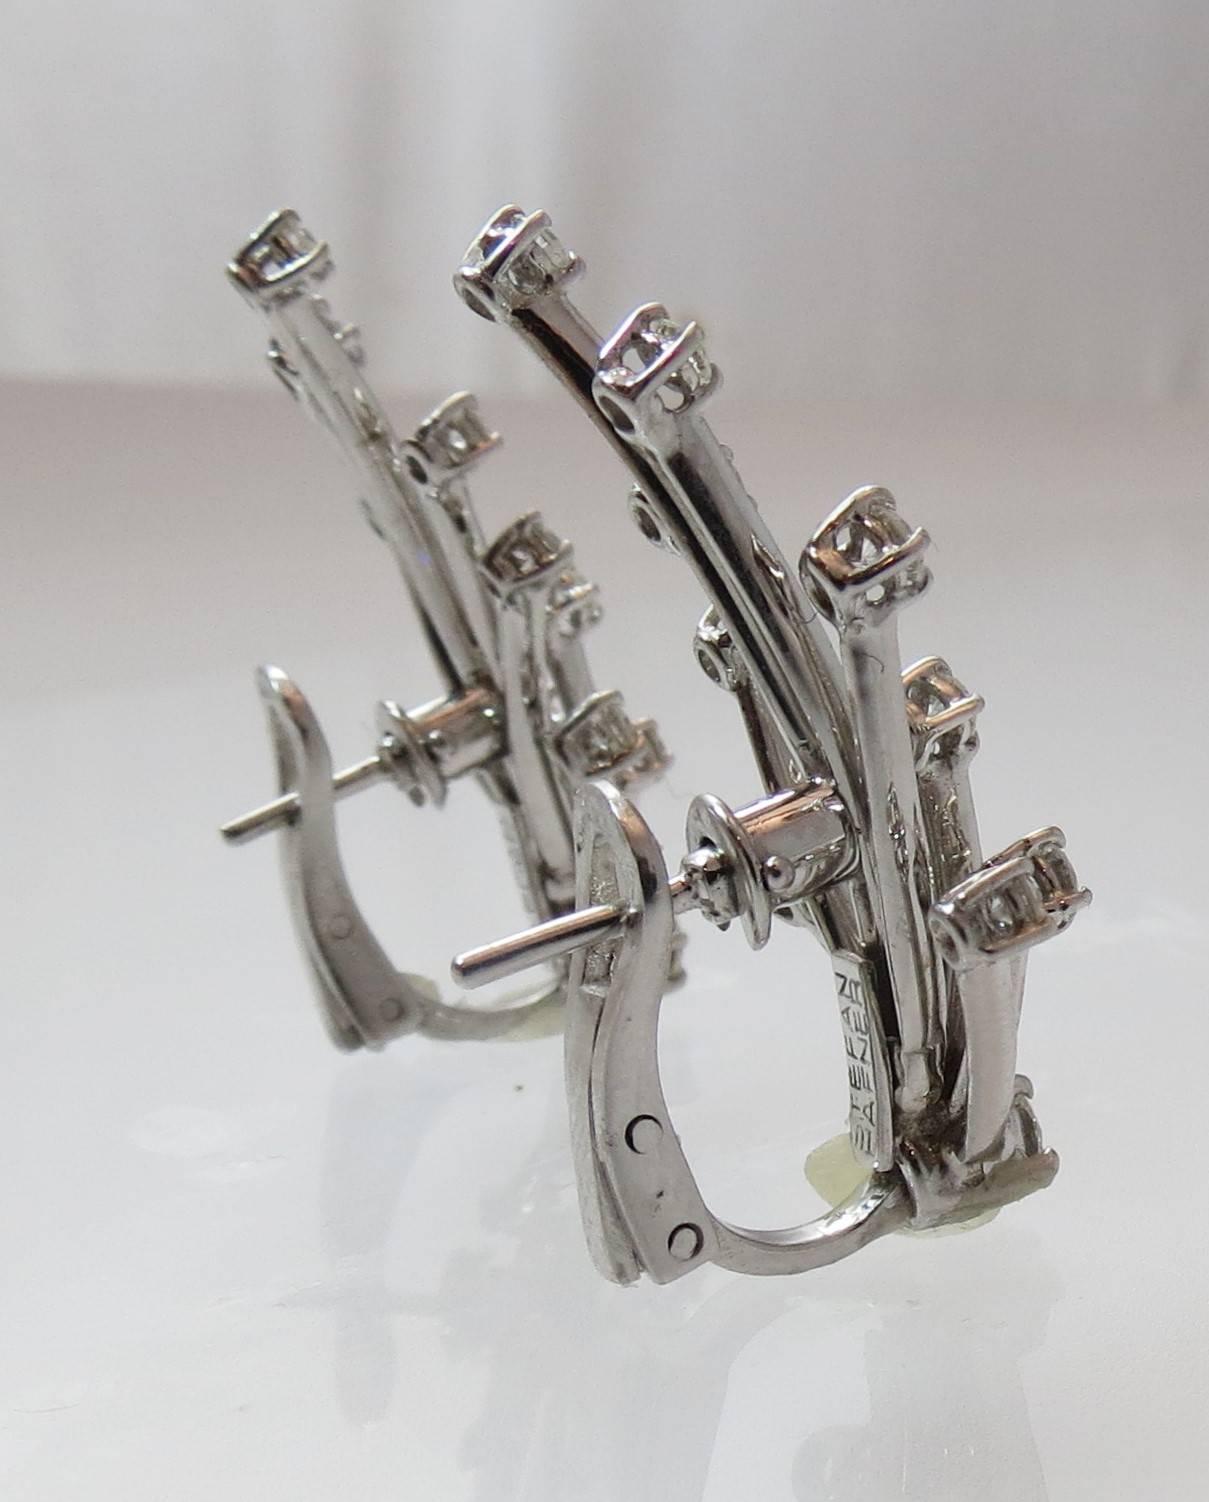 Fabulous 18K white gold diamond spray design earrings, prong set with 22 full cut round diamonds weighing about 1.04 cts total.